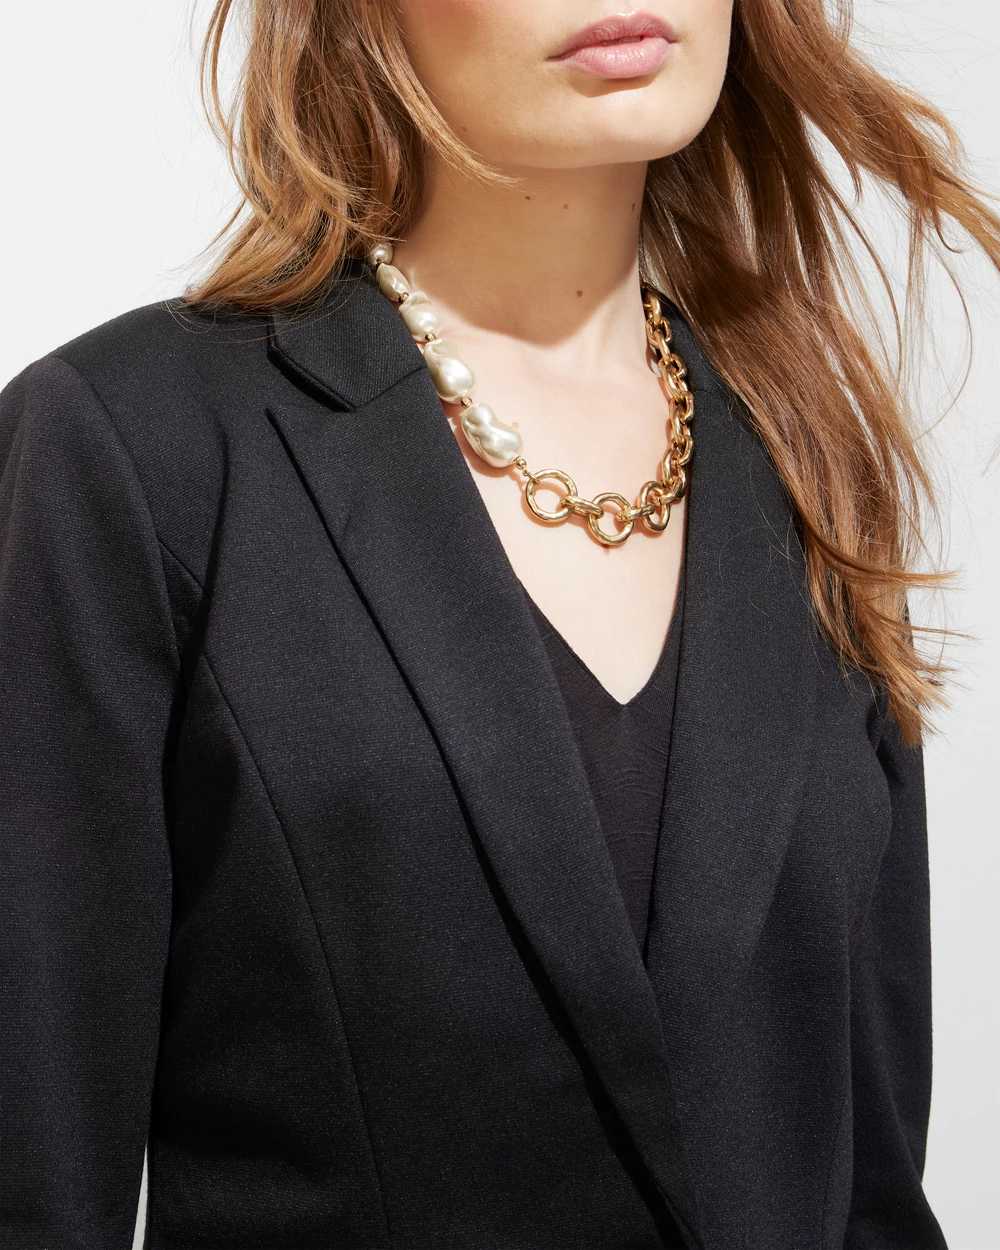 Outlet WHBM Everyday Knit Blazer click to view larger image.